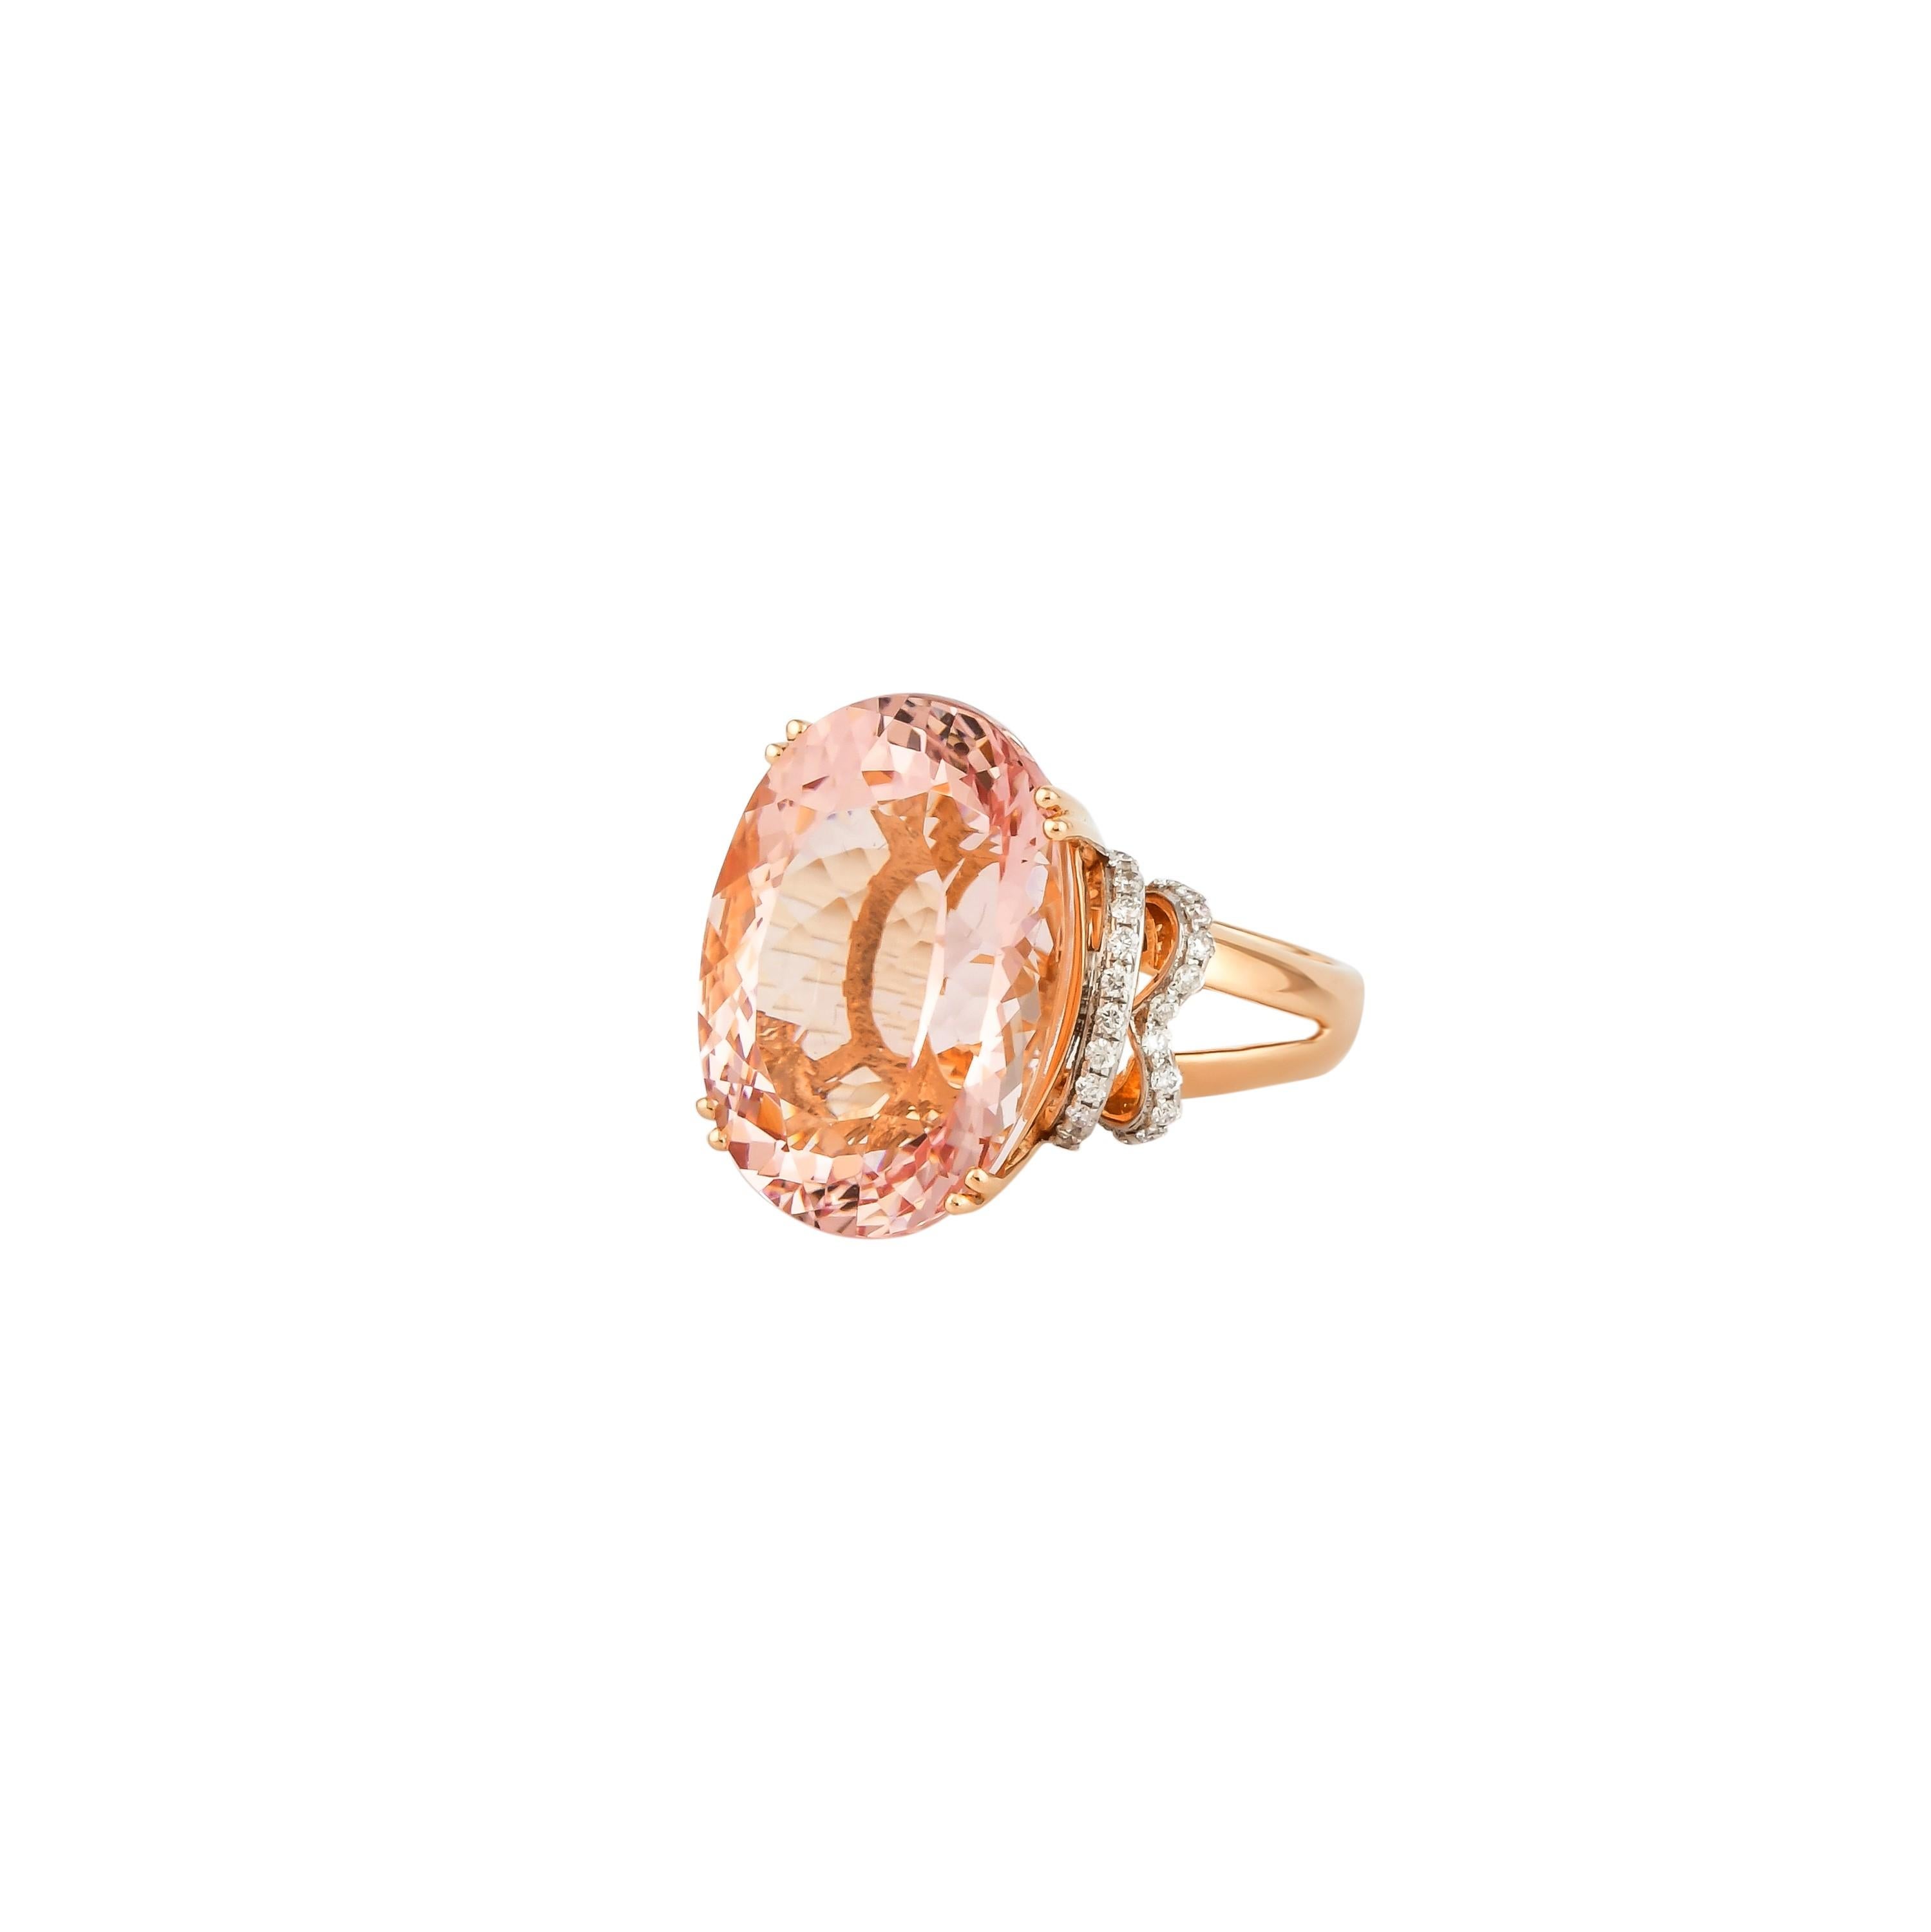 Contemporary 15.2 Carat Morganite and Diamond Ring in 18 Karat Rose Gold For Sale